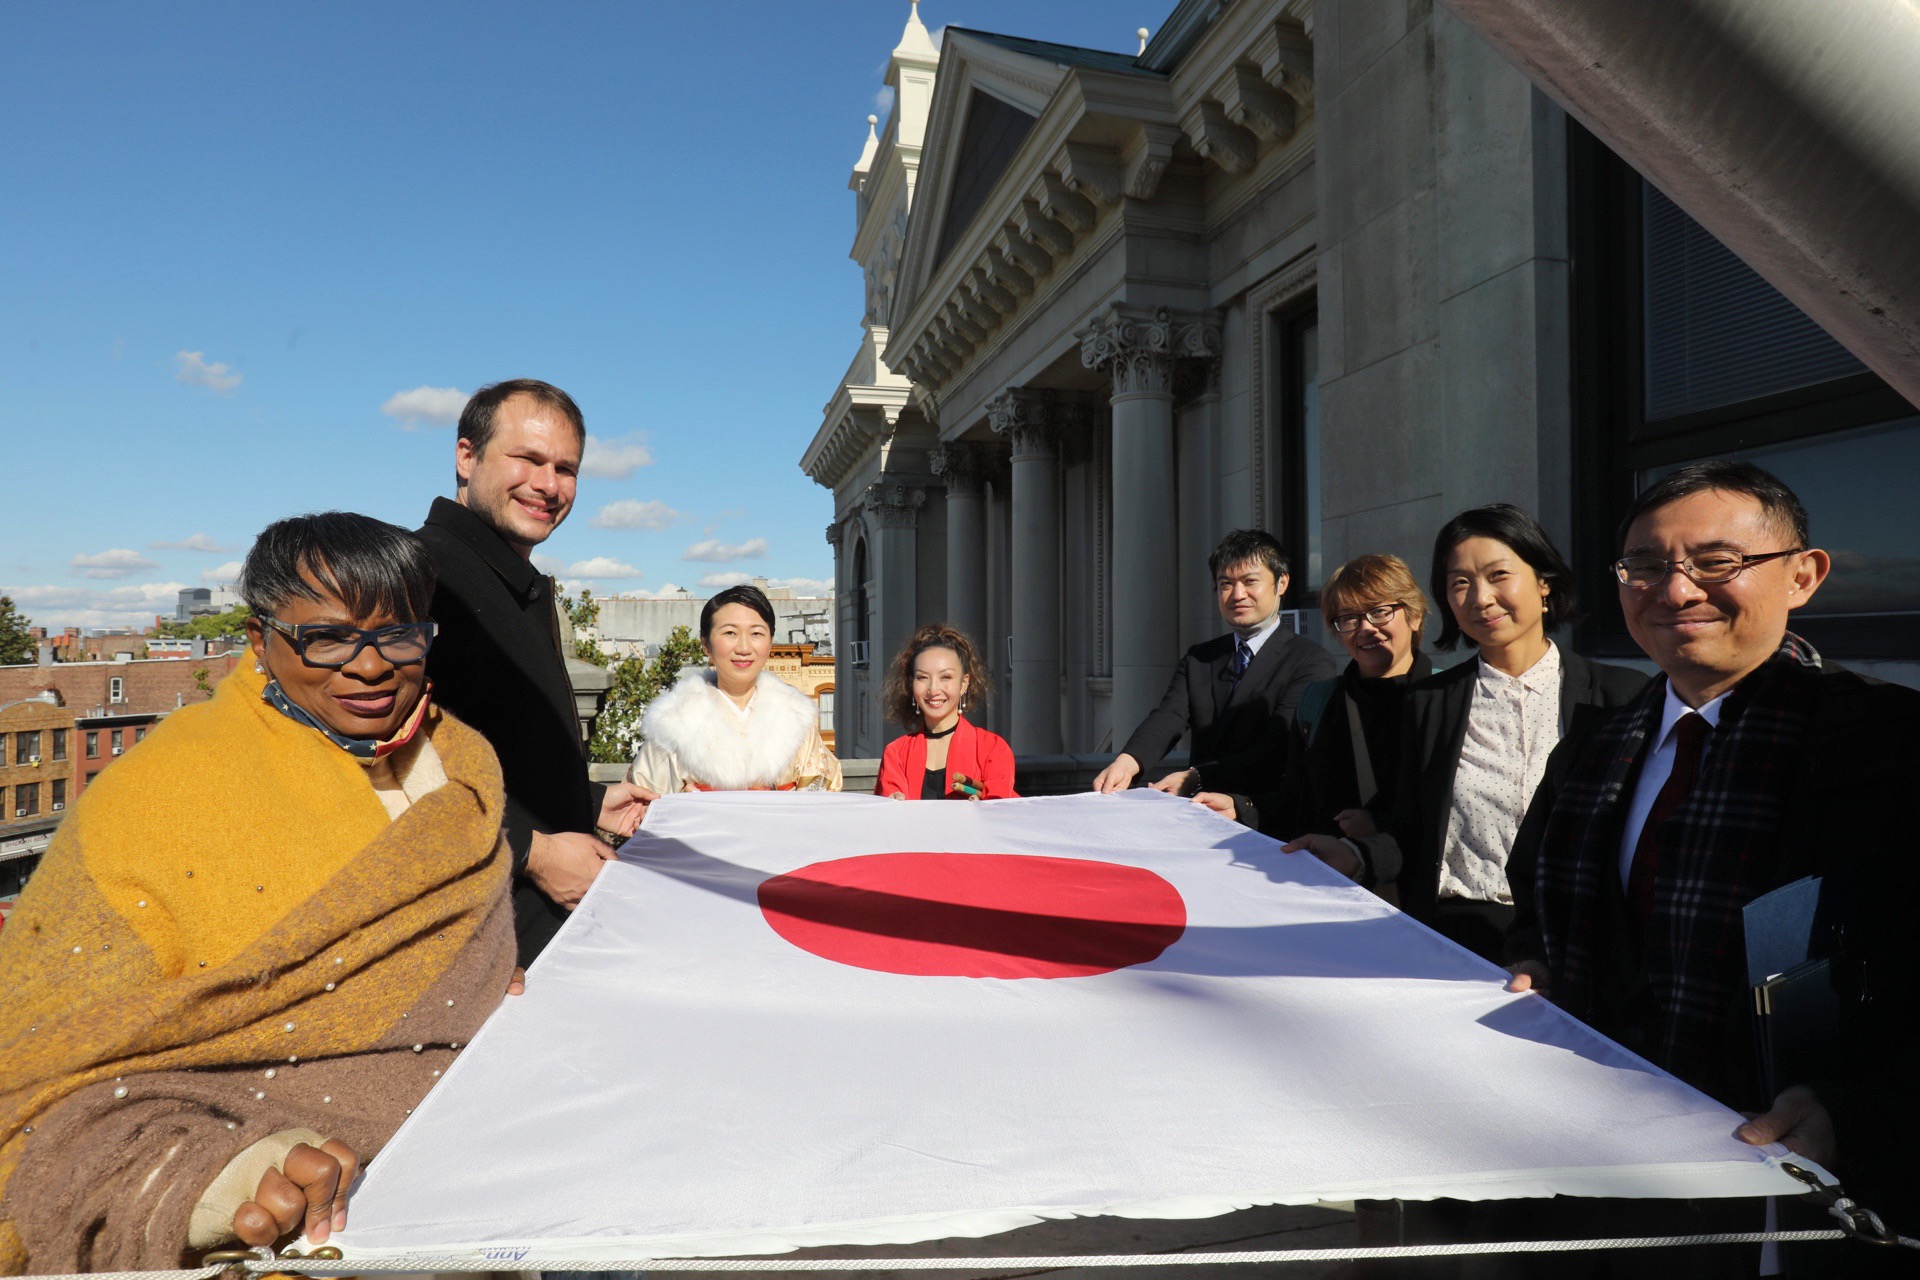 A group of people hold the flag before it is raised. The flag is a rectangular white banner bearing a crimson-red circle at its center.